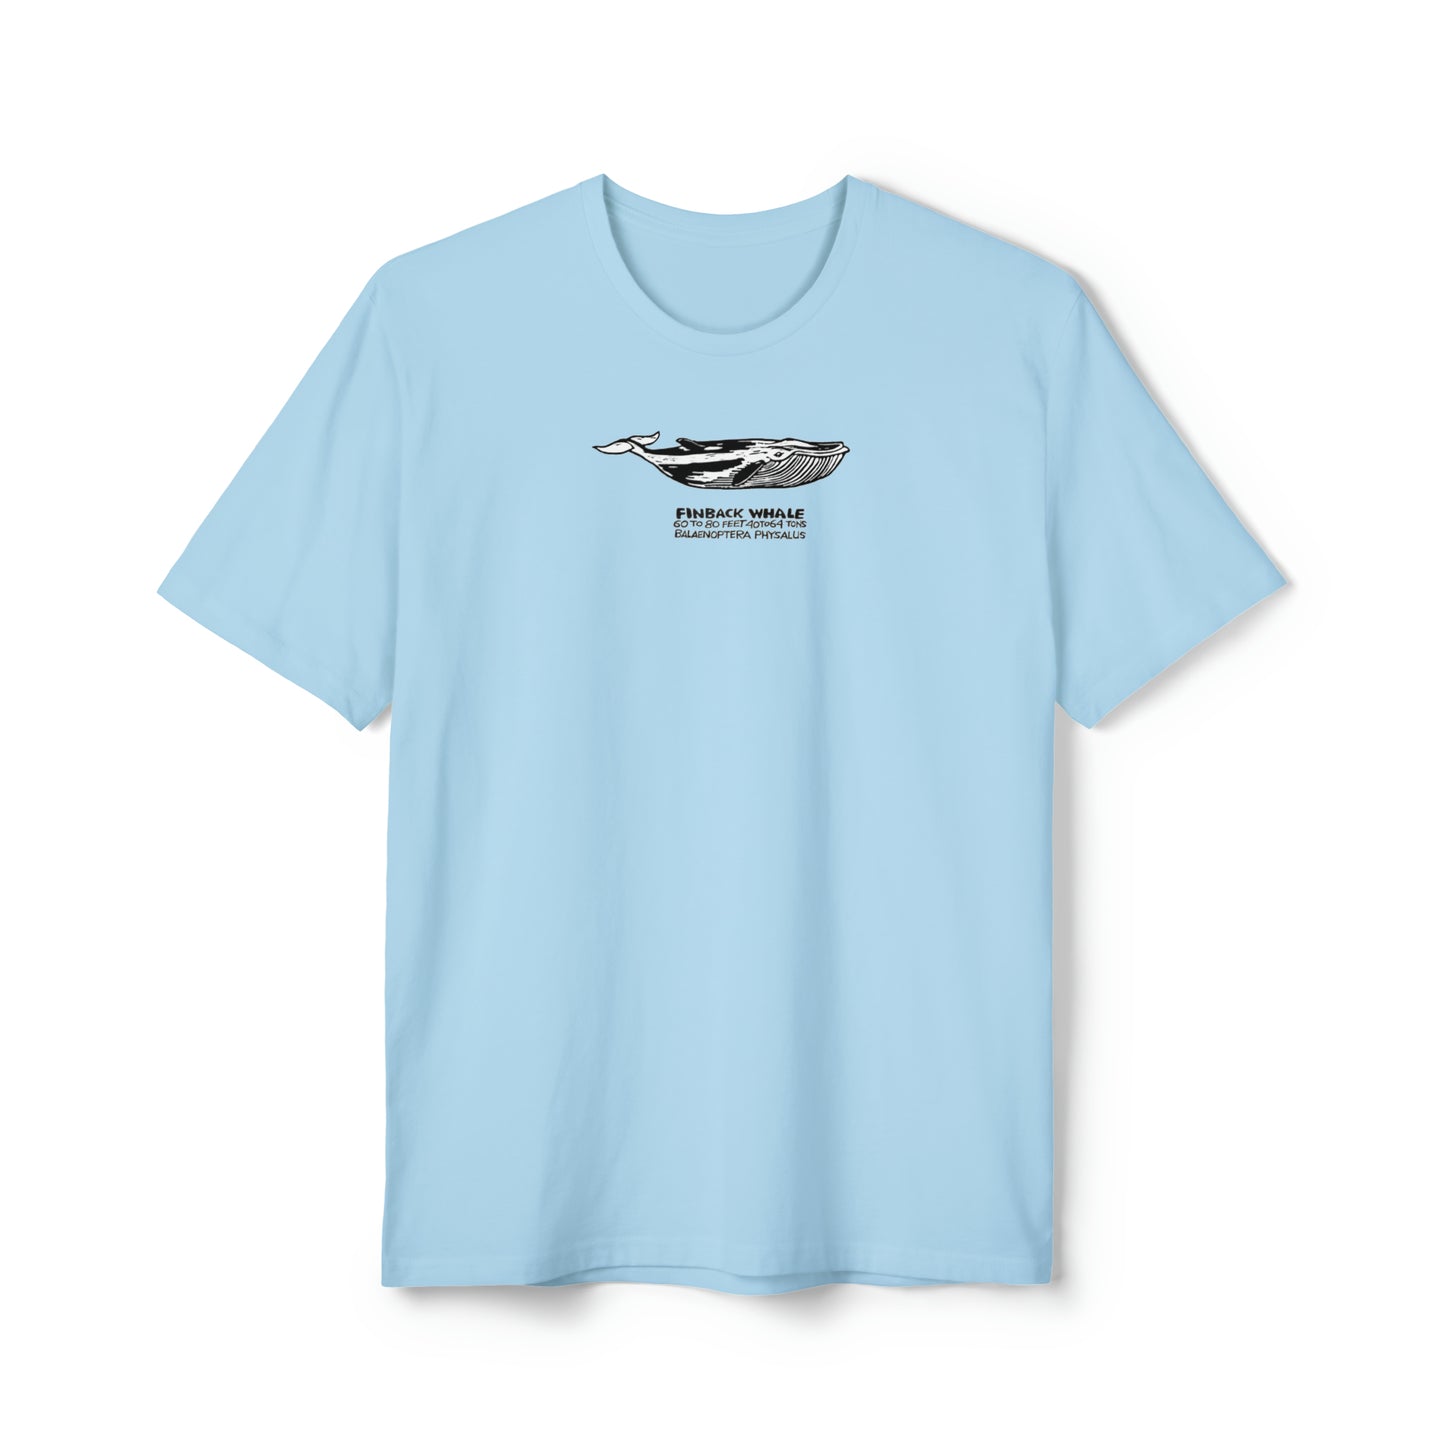 Black, white, and gray Finback Whale on crystal blue color unisex men's t-shirt. Text under image says Finback Whale plus height weight and Latin name.